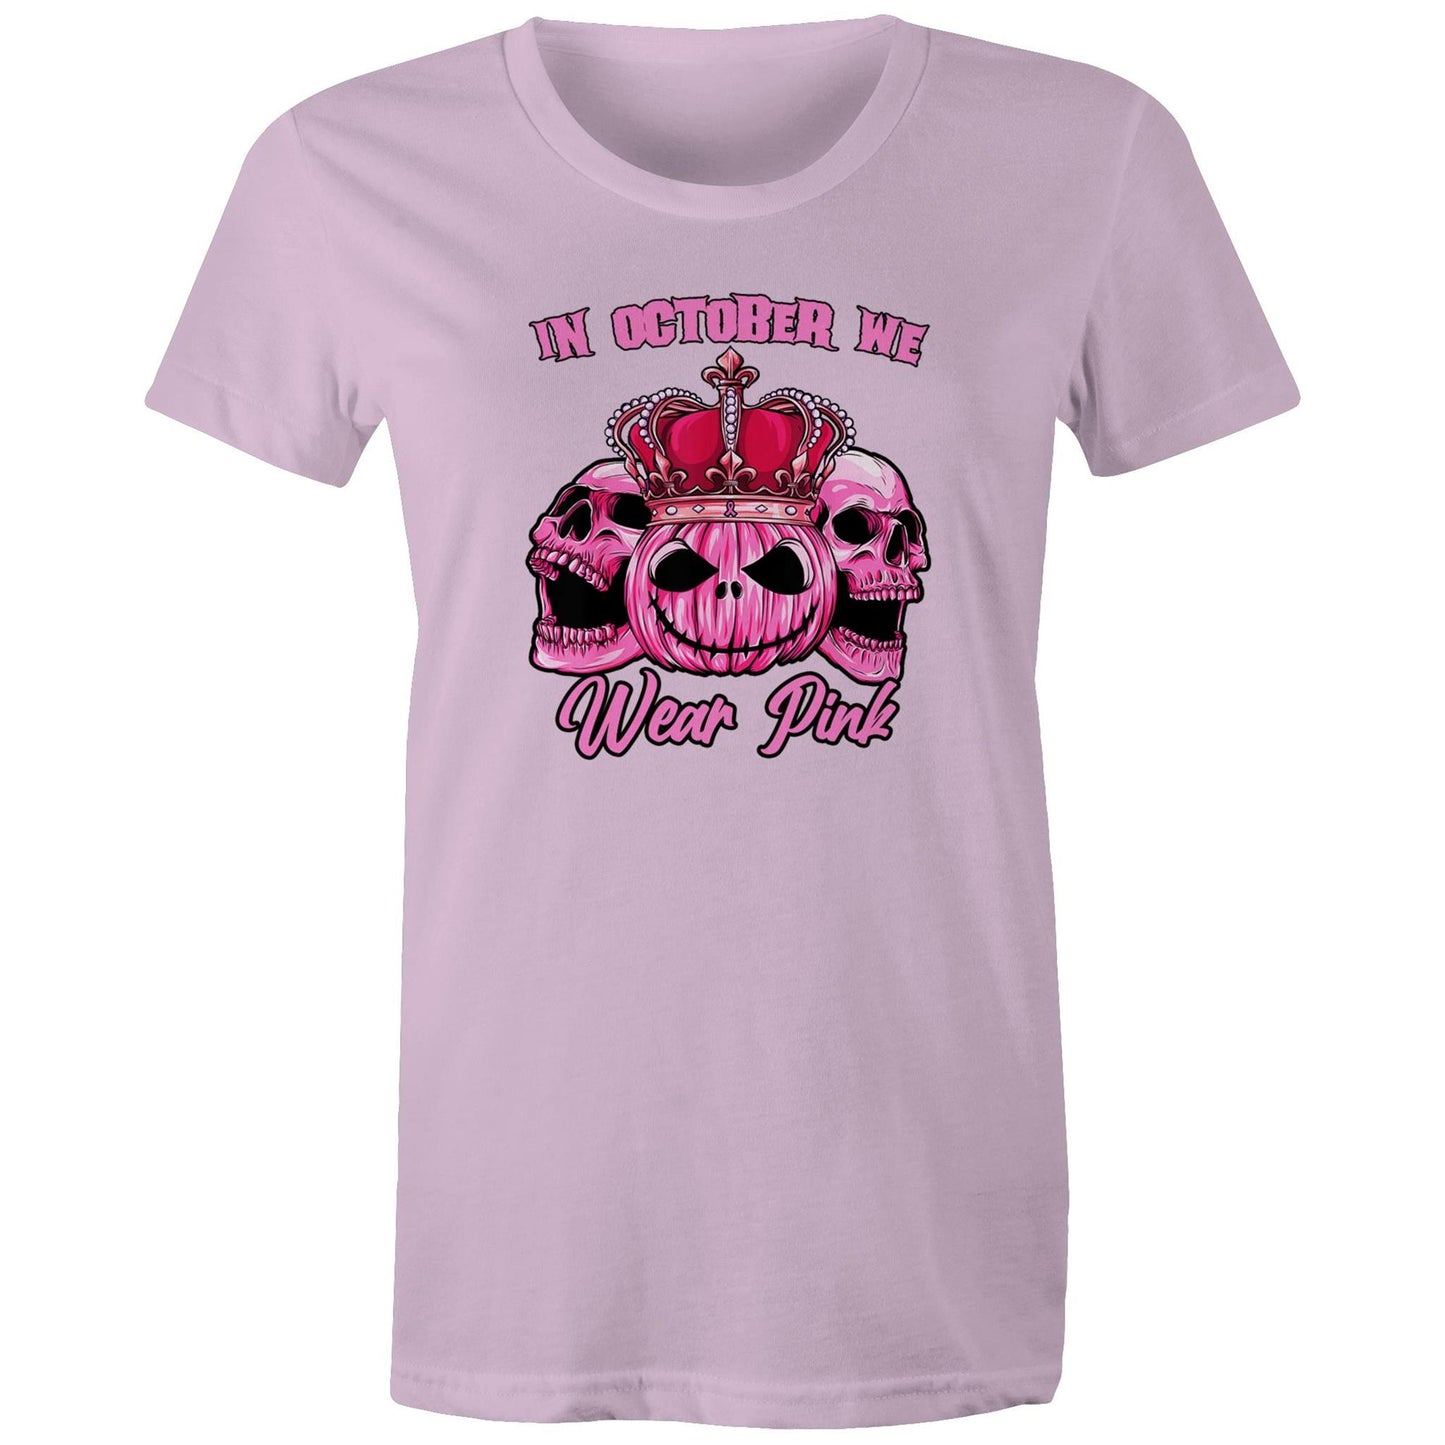 In October We Wear Pink - Womans Tee - Online Ordering Only